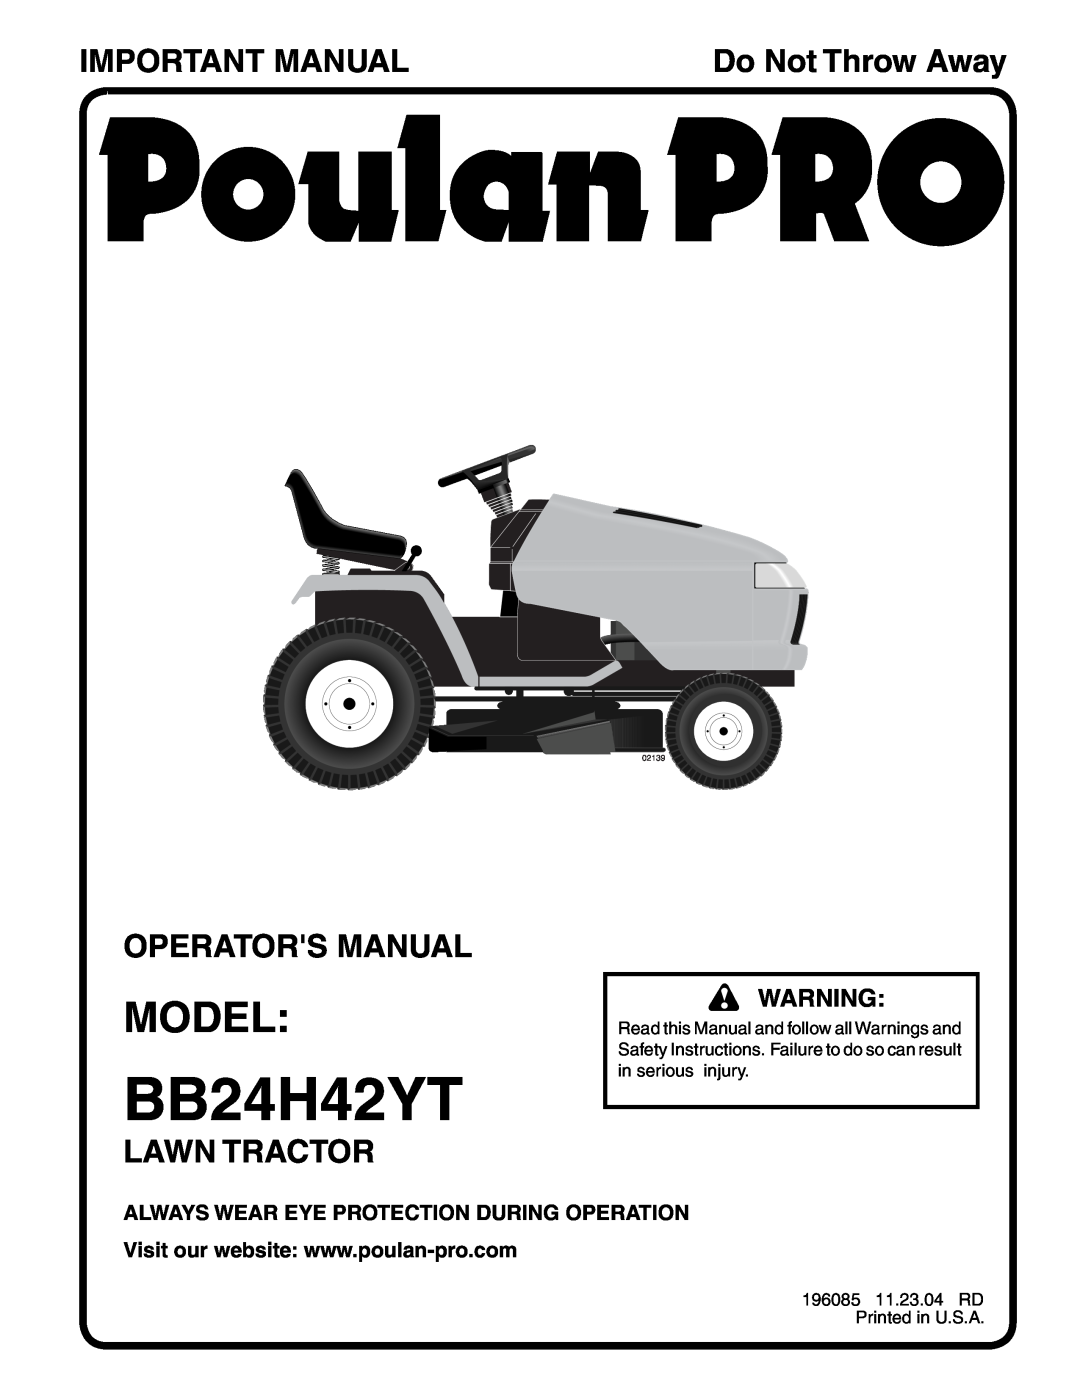 Poulan 196085 manual Model, Important Manual, Operators Manual, Lawn Tractor, Always Wear Eye Protection During Operation 